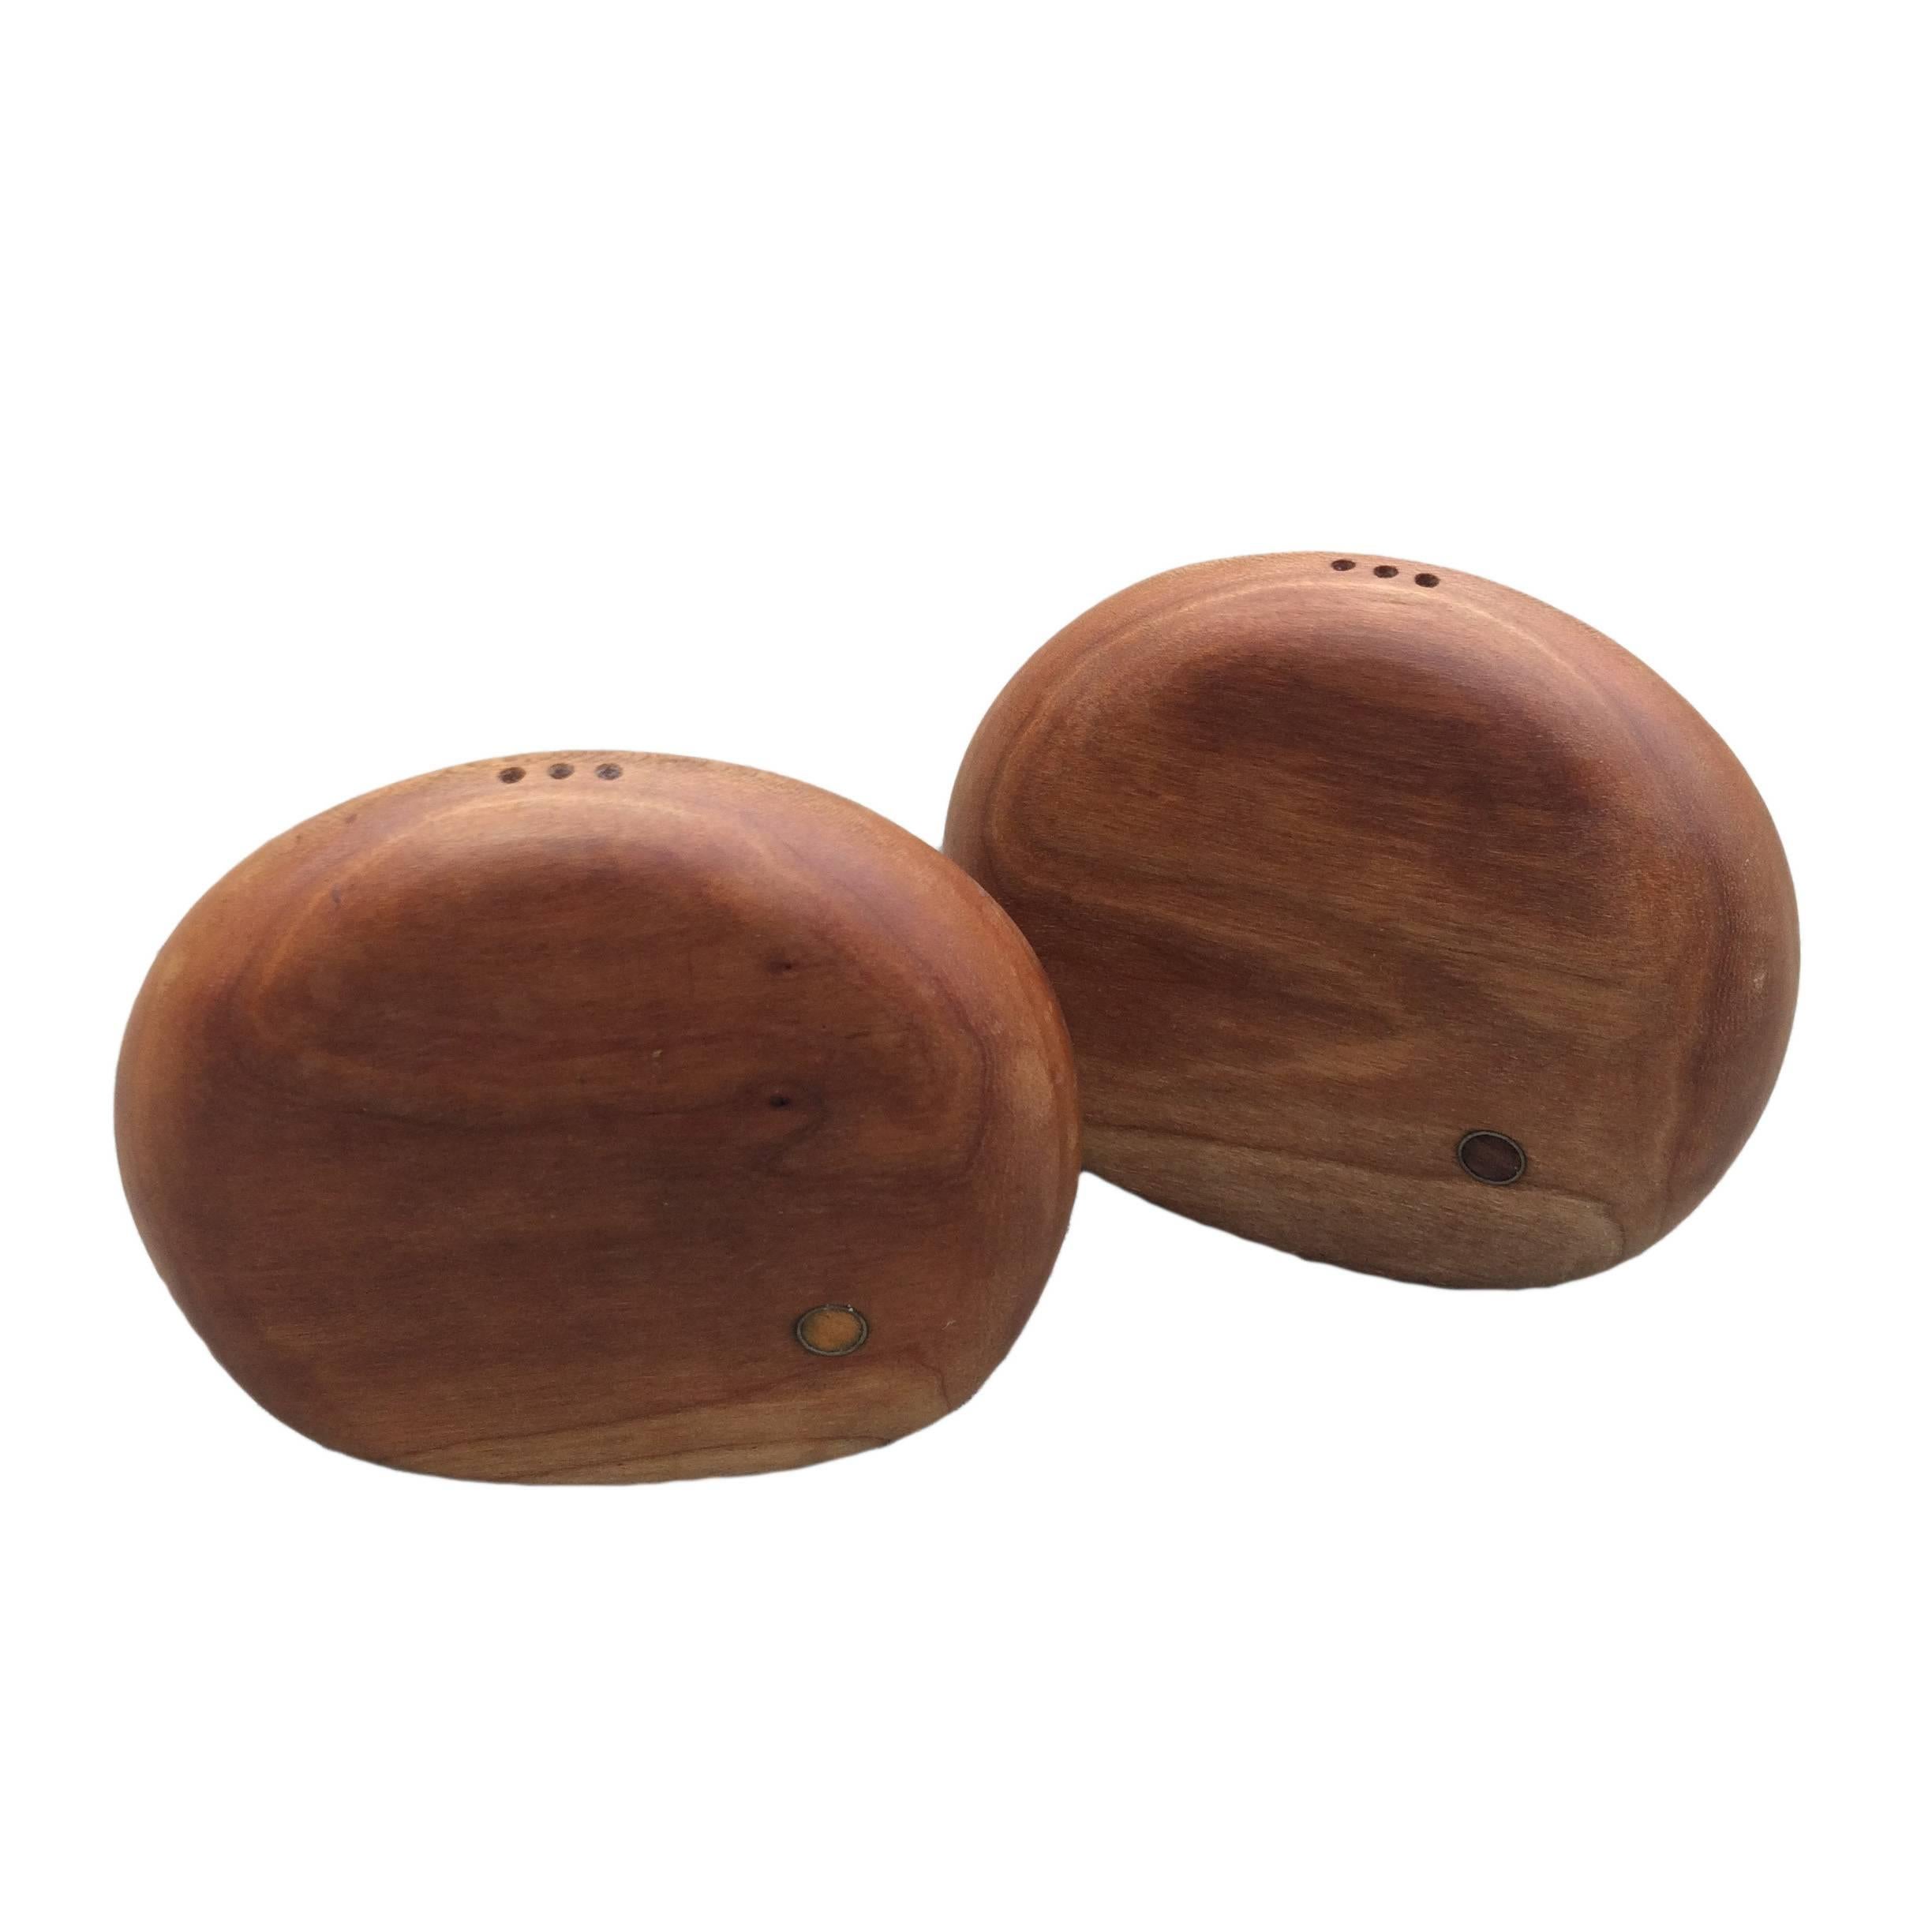 Studio Made Walnut Salt and Pepper Shakers by Joe Chasnoff and Judy Azulay For Sale